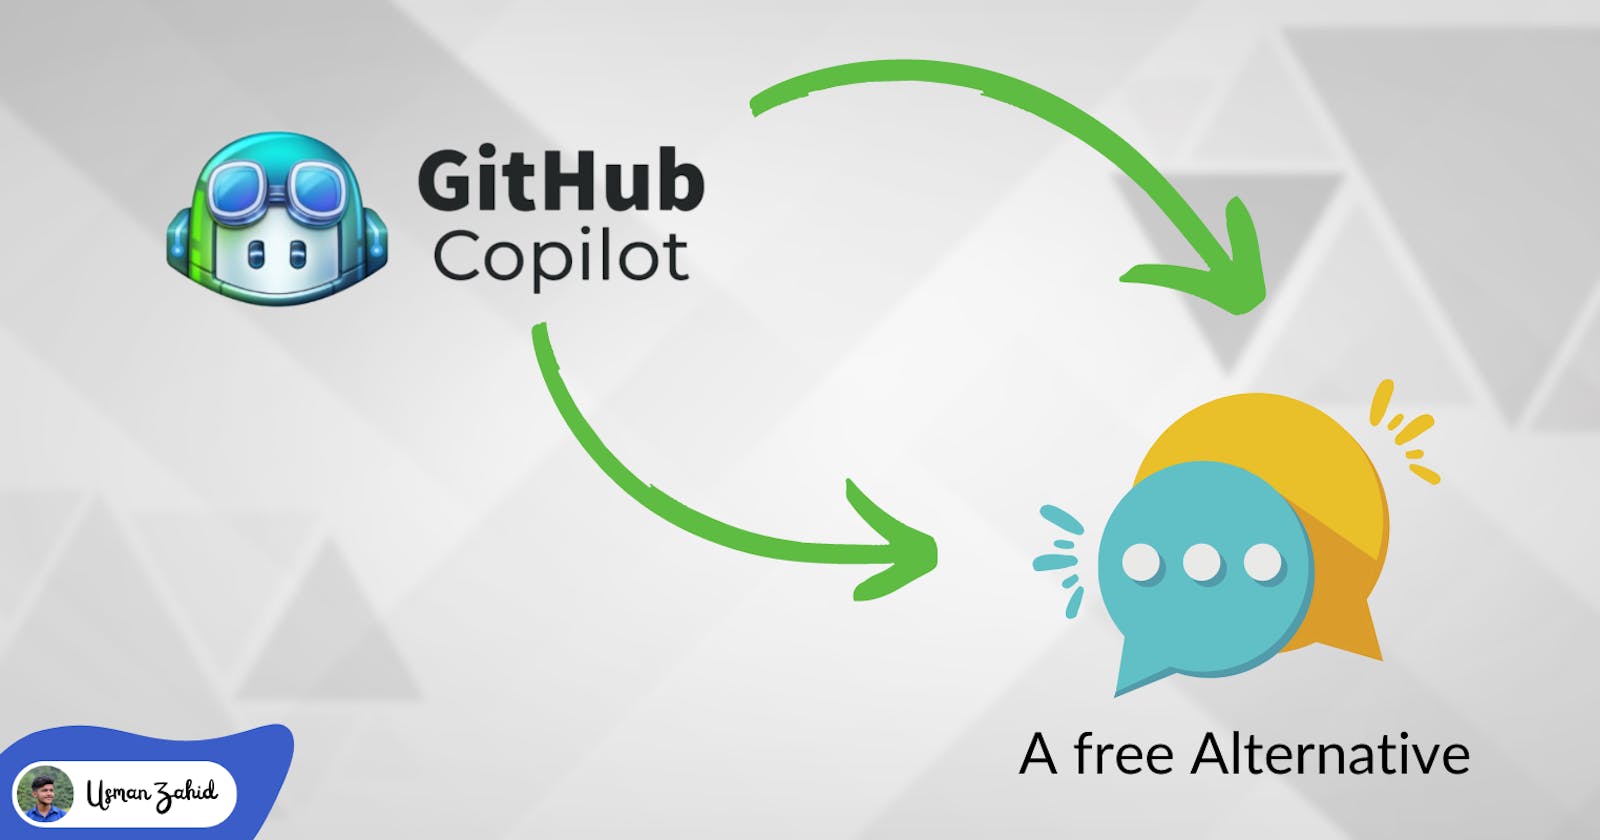 You don't need to pay for Github Copilot, here's why